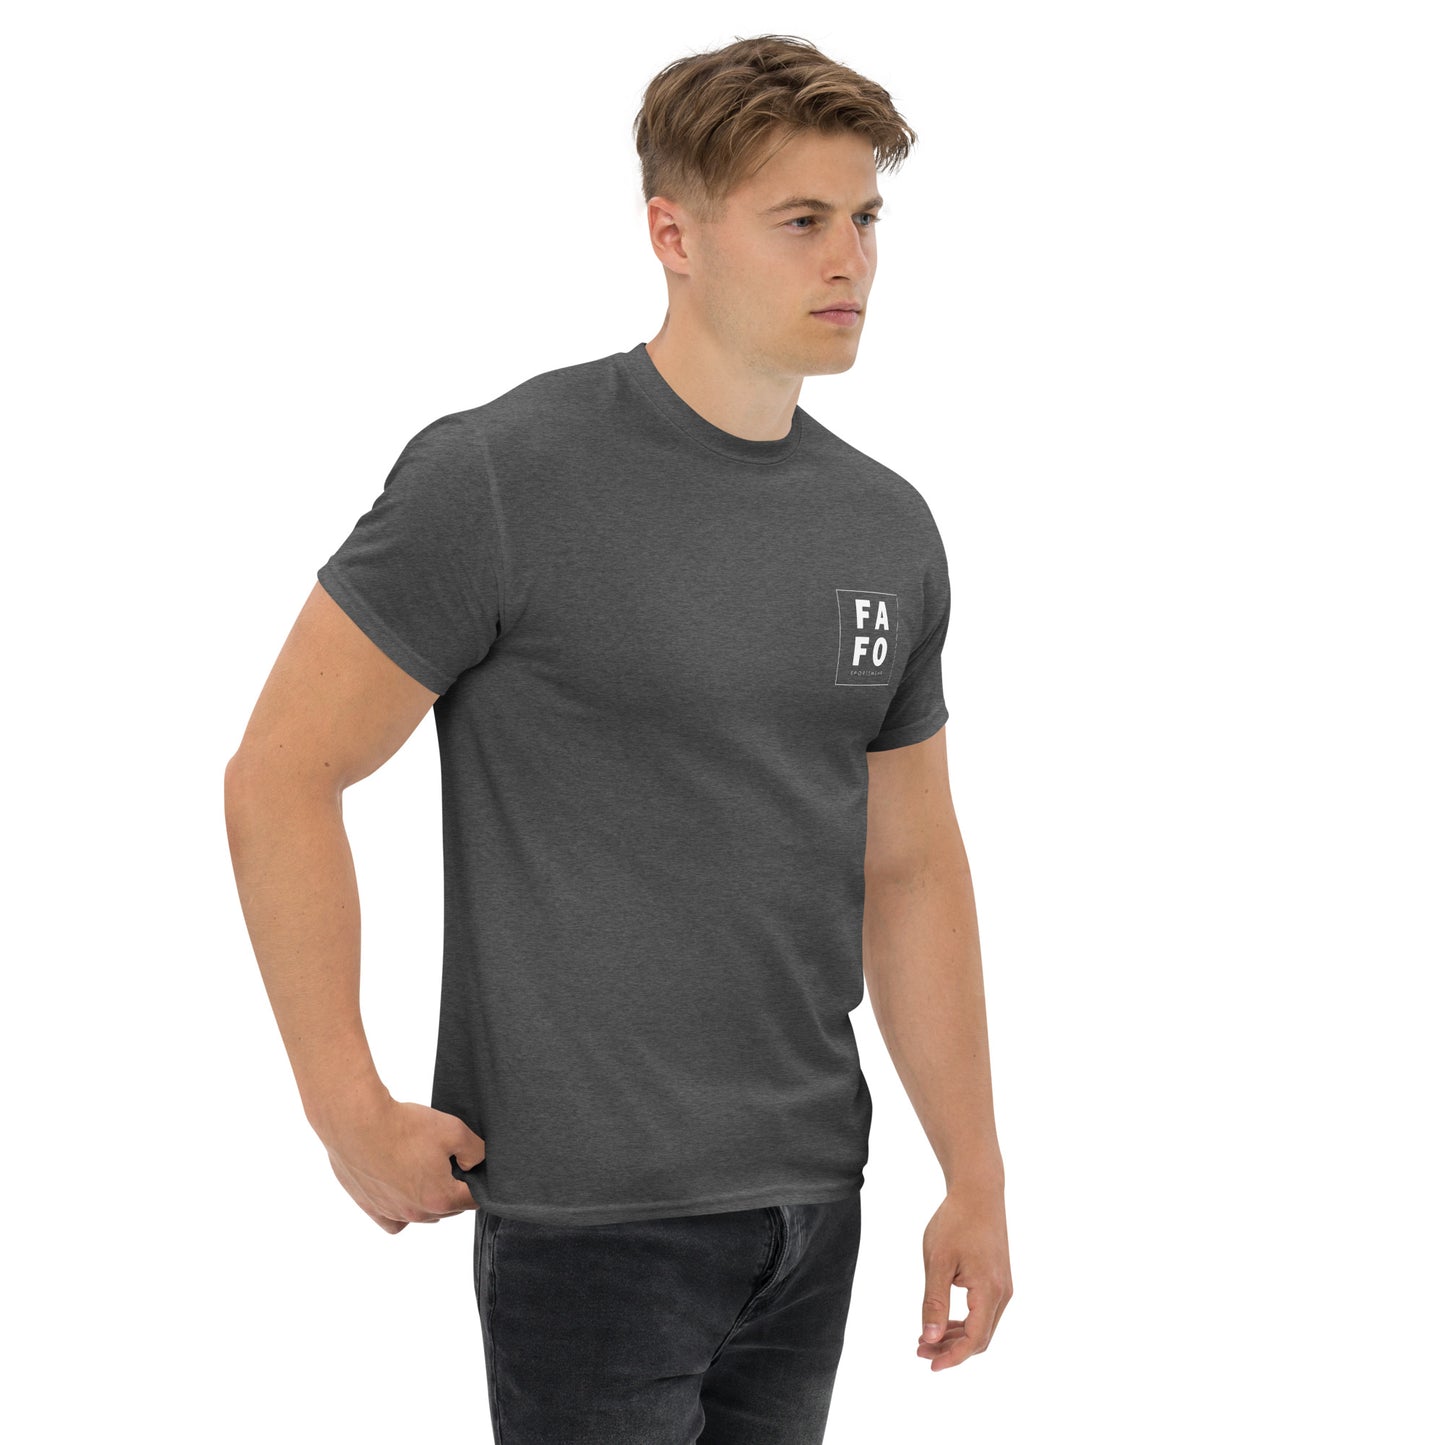 Men's Tee - F*k Around and Find Out - FAFO Sportswear